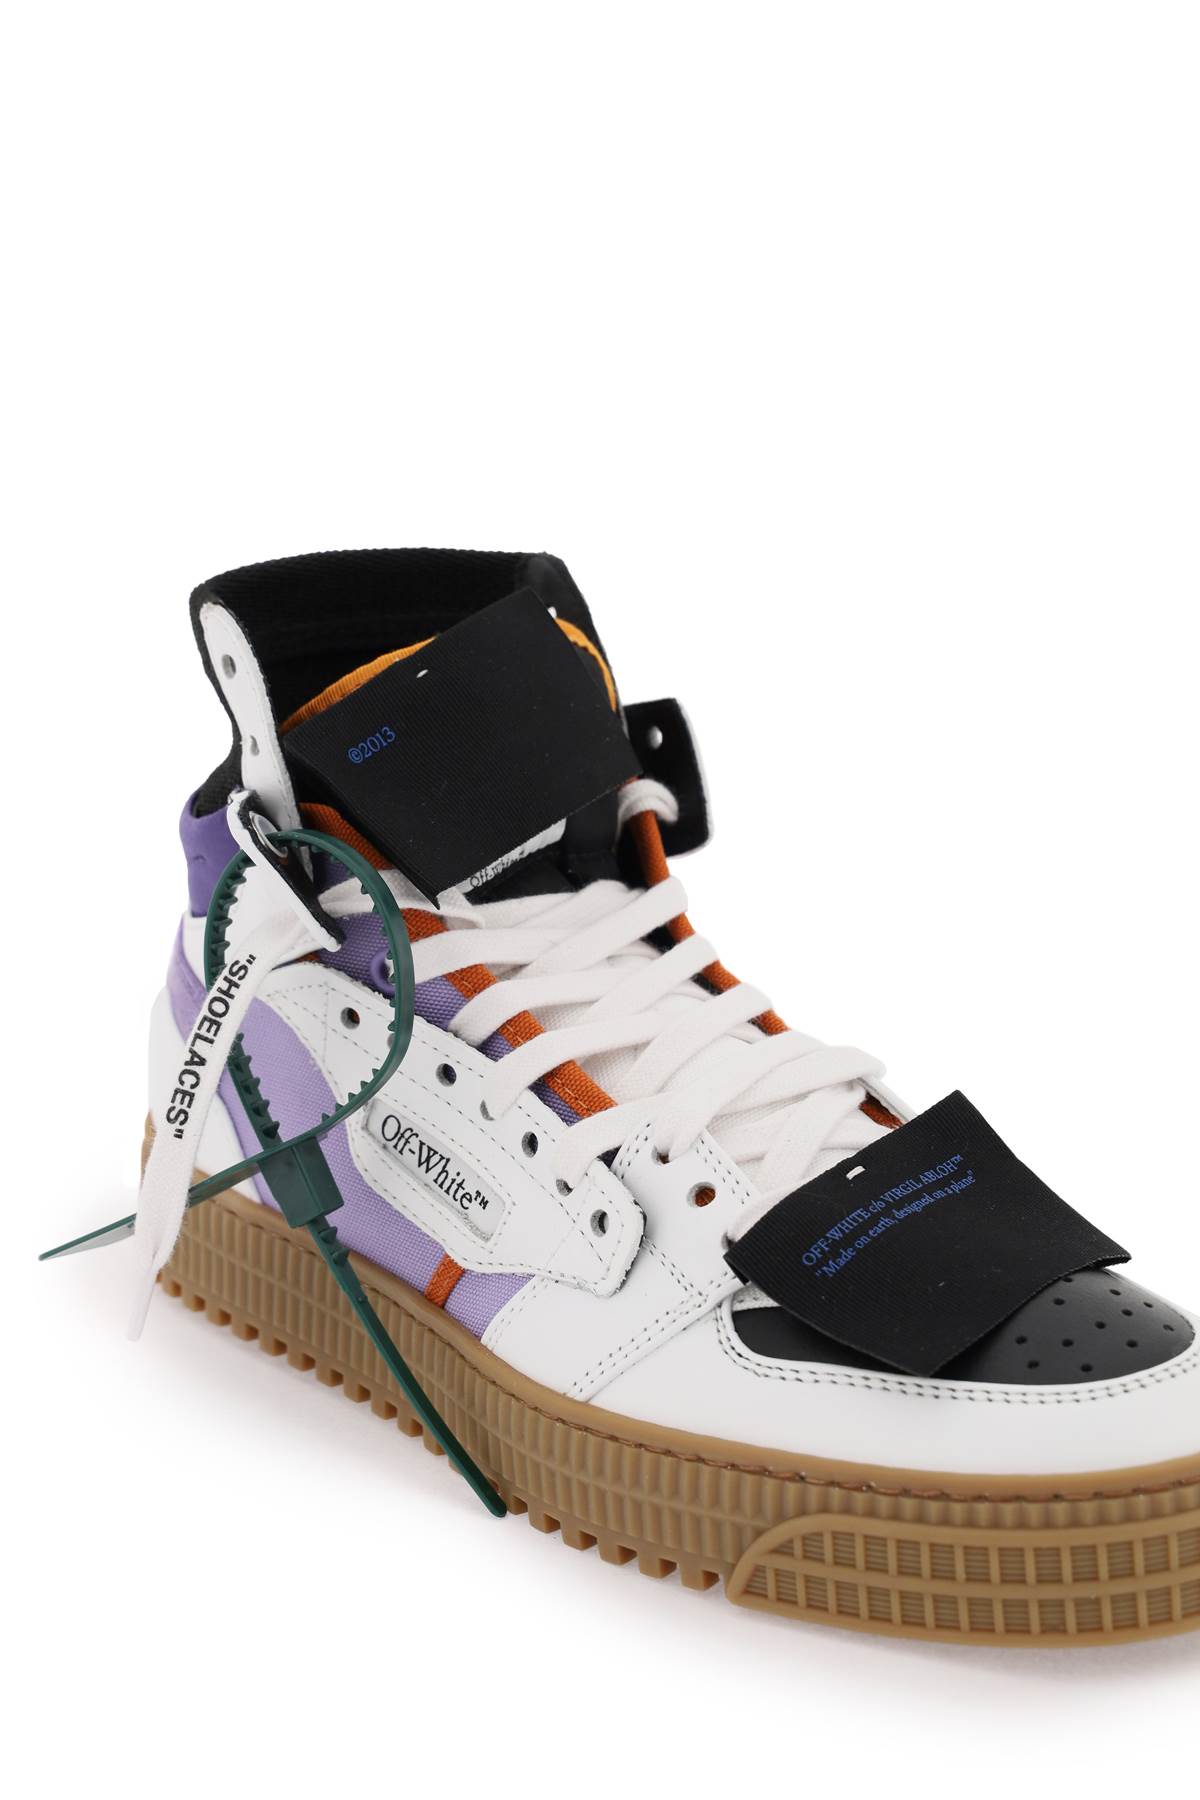 Off-White c/o Virgil Abloh 3.0 Off Court Lace-up Sneakers in Blue